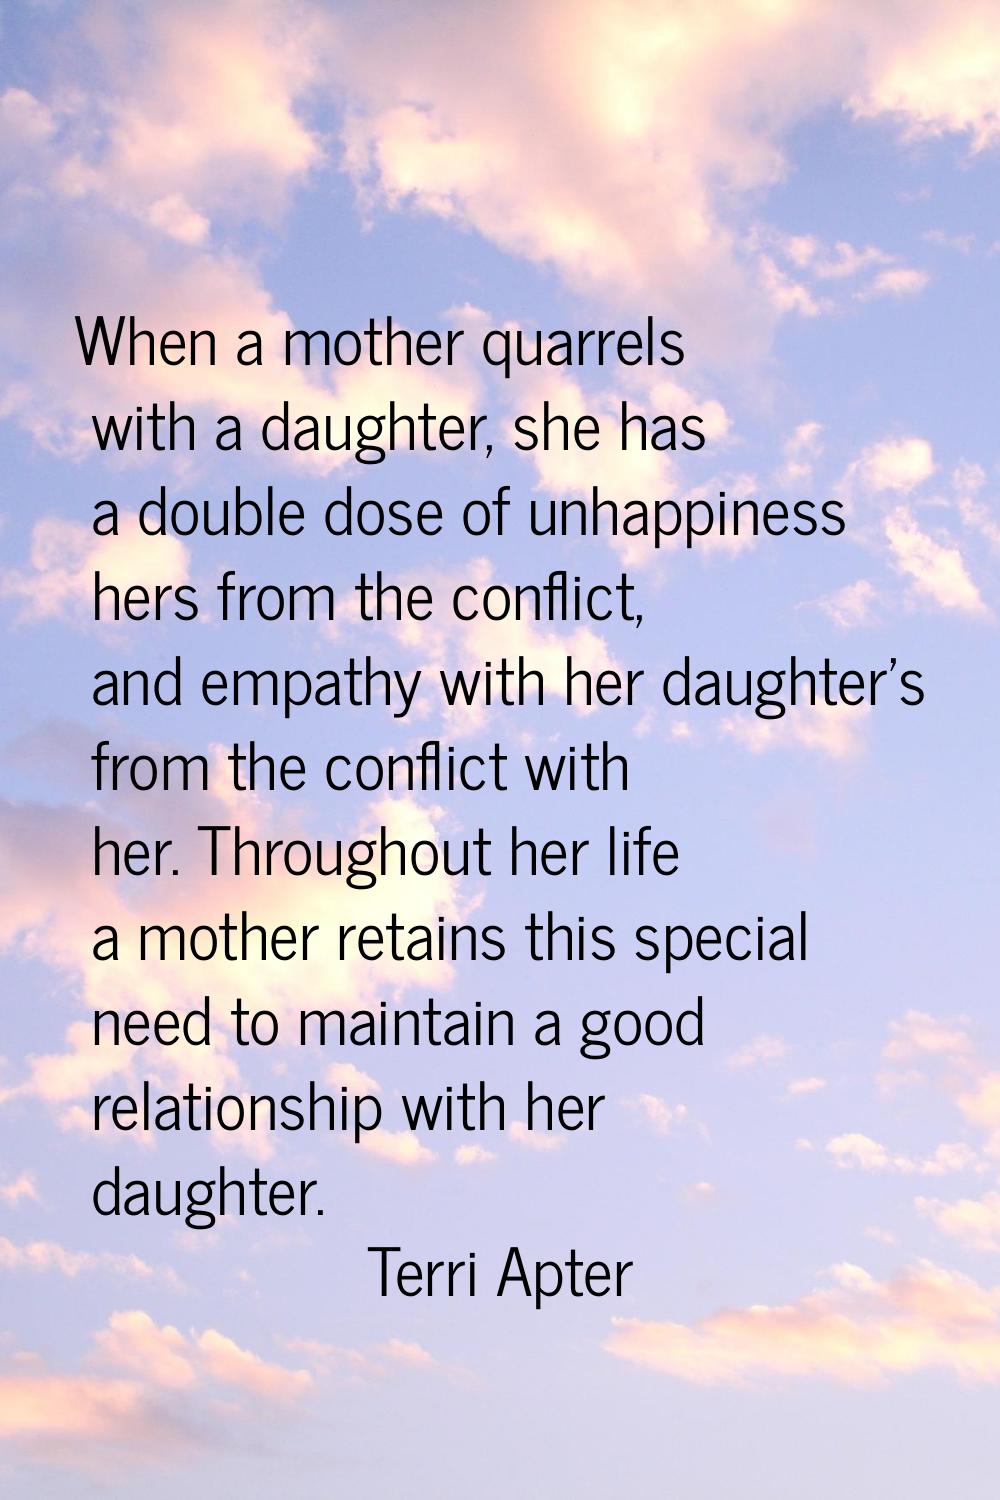 When a mother quarrels with a daughter, she has a double dose of unhappiness hers from the conflict